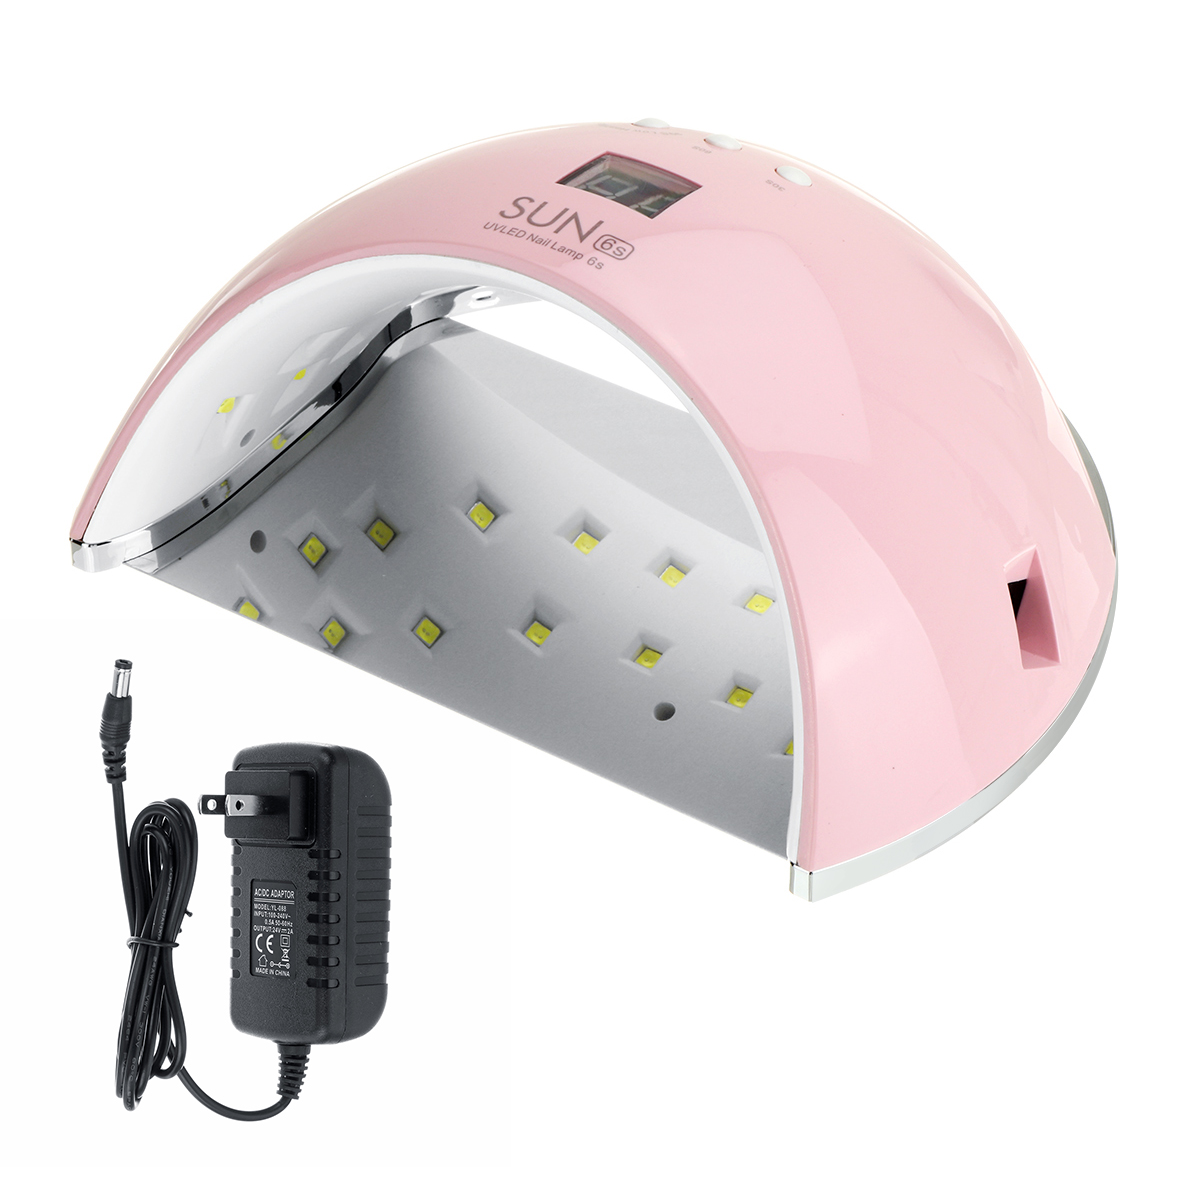 Find 48W SUN6 LED UV Nail Lamp Light Gel Polish Cure Nail Dryer UV Lamp US/EU Plug for Sale on Gipsybee.com with cryptocurrencies